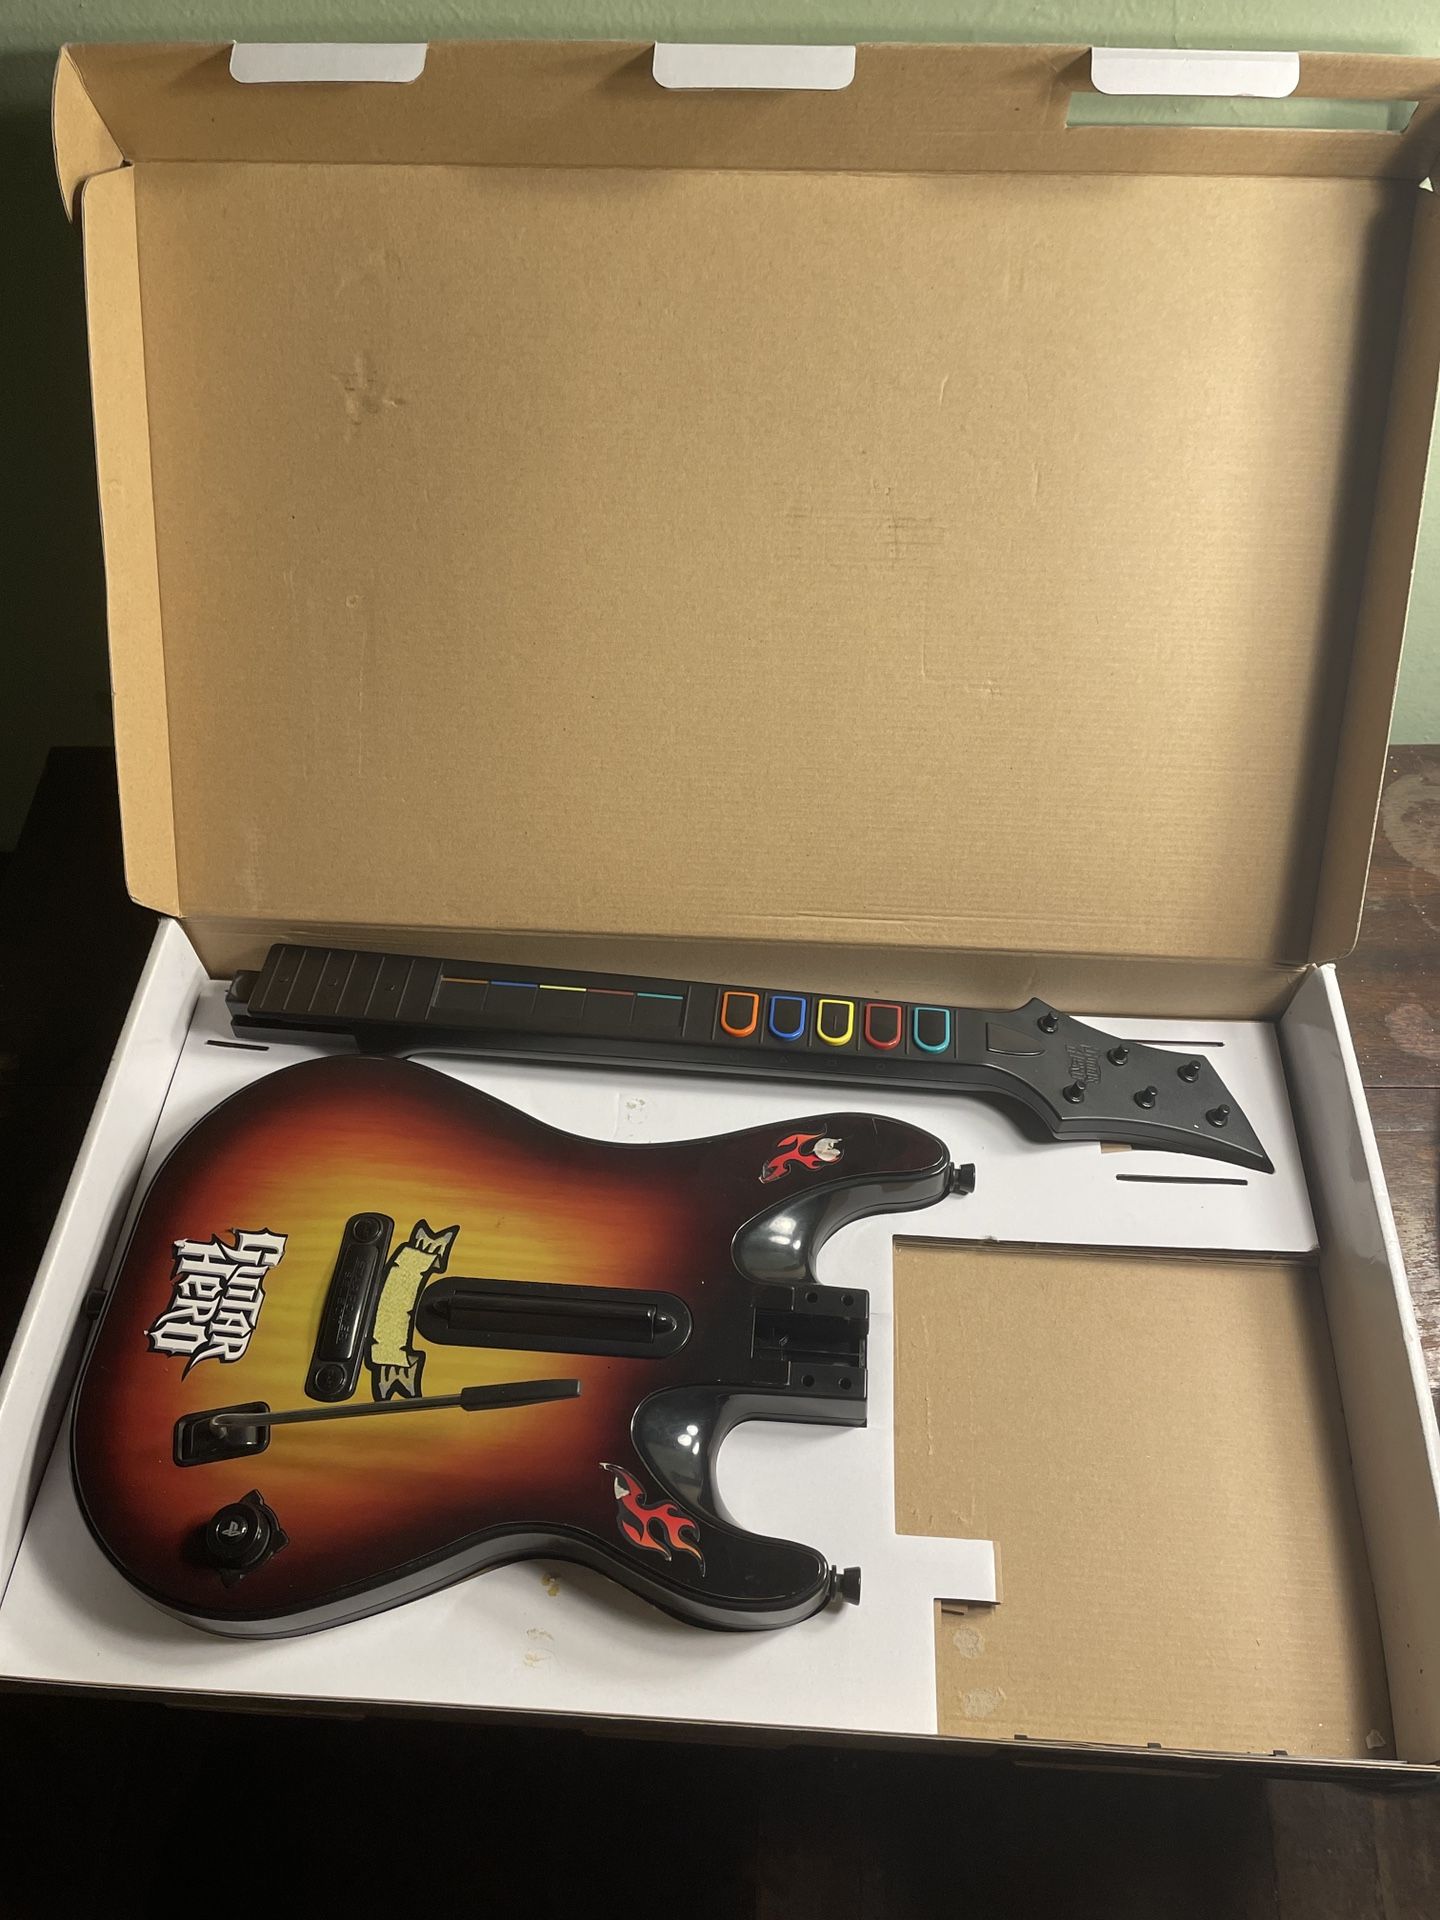 ps3 rock band guitar with dongle